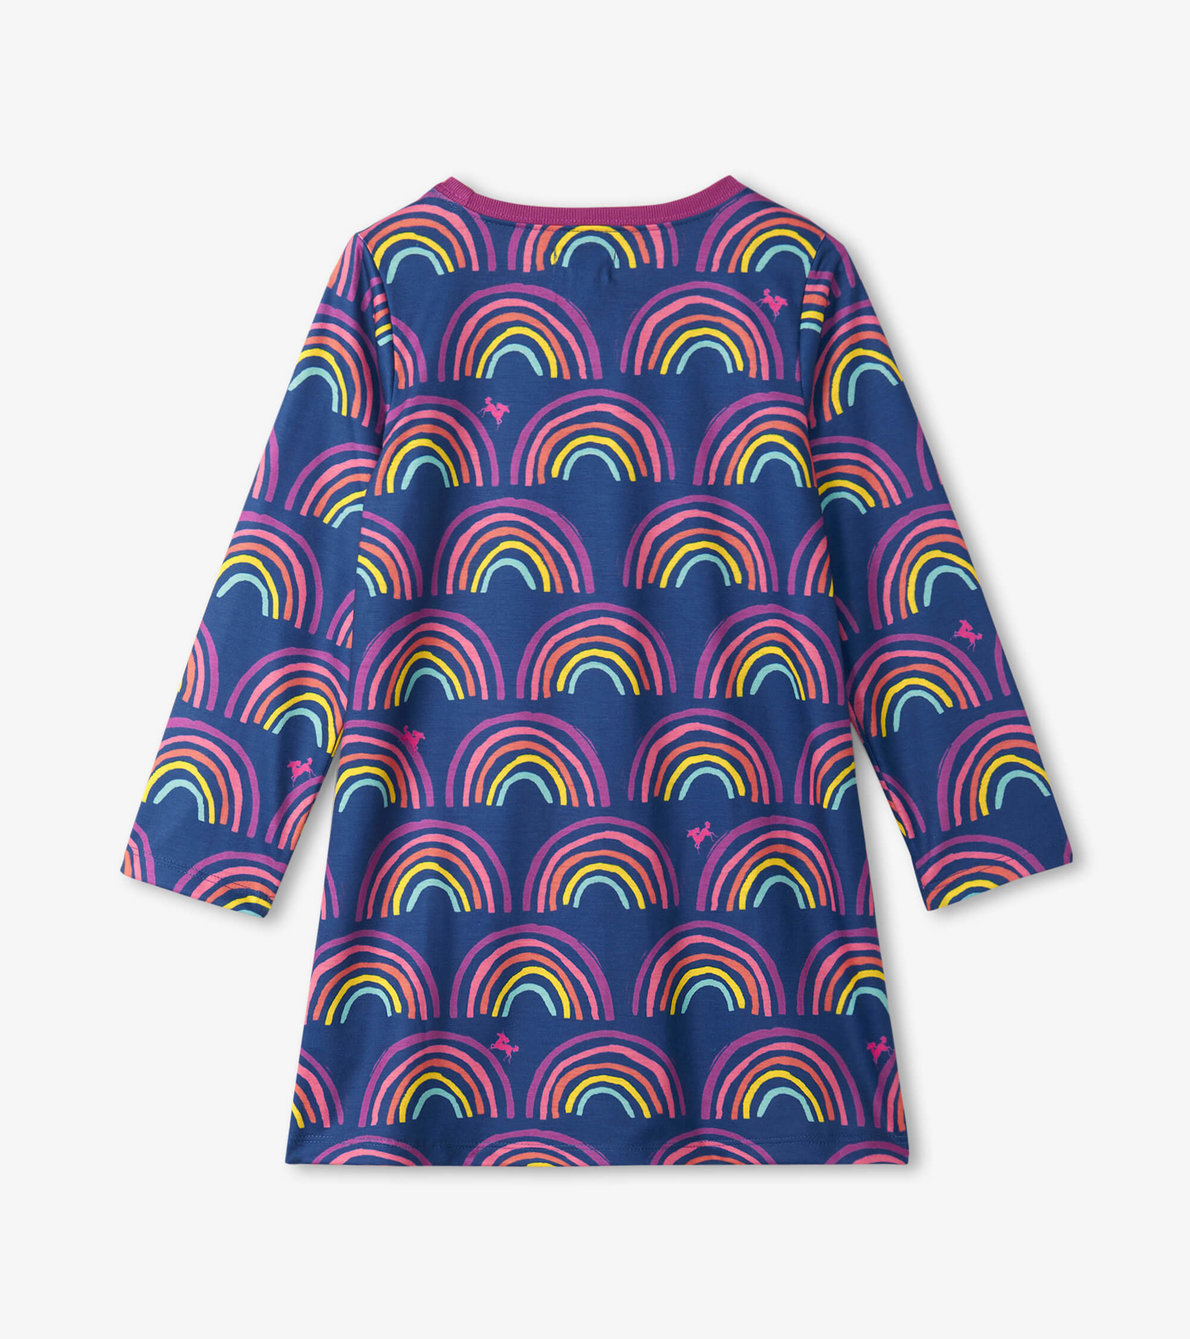 View larger image of Rainbow Dreams Long Sleeve Girls Nightgown